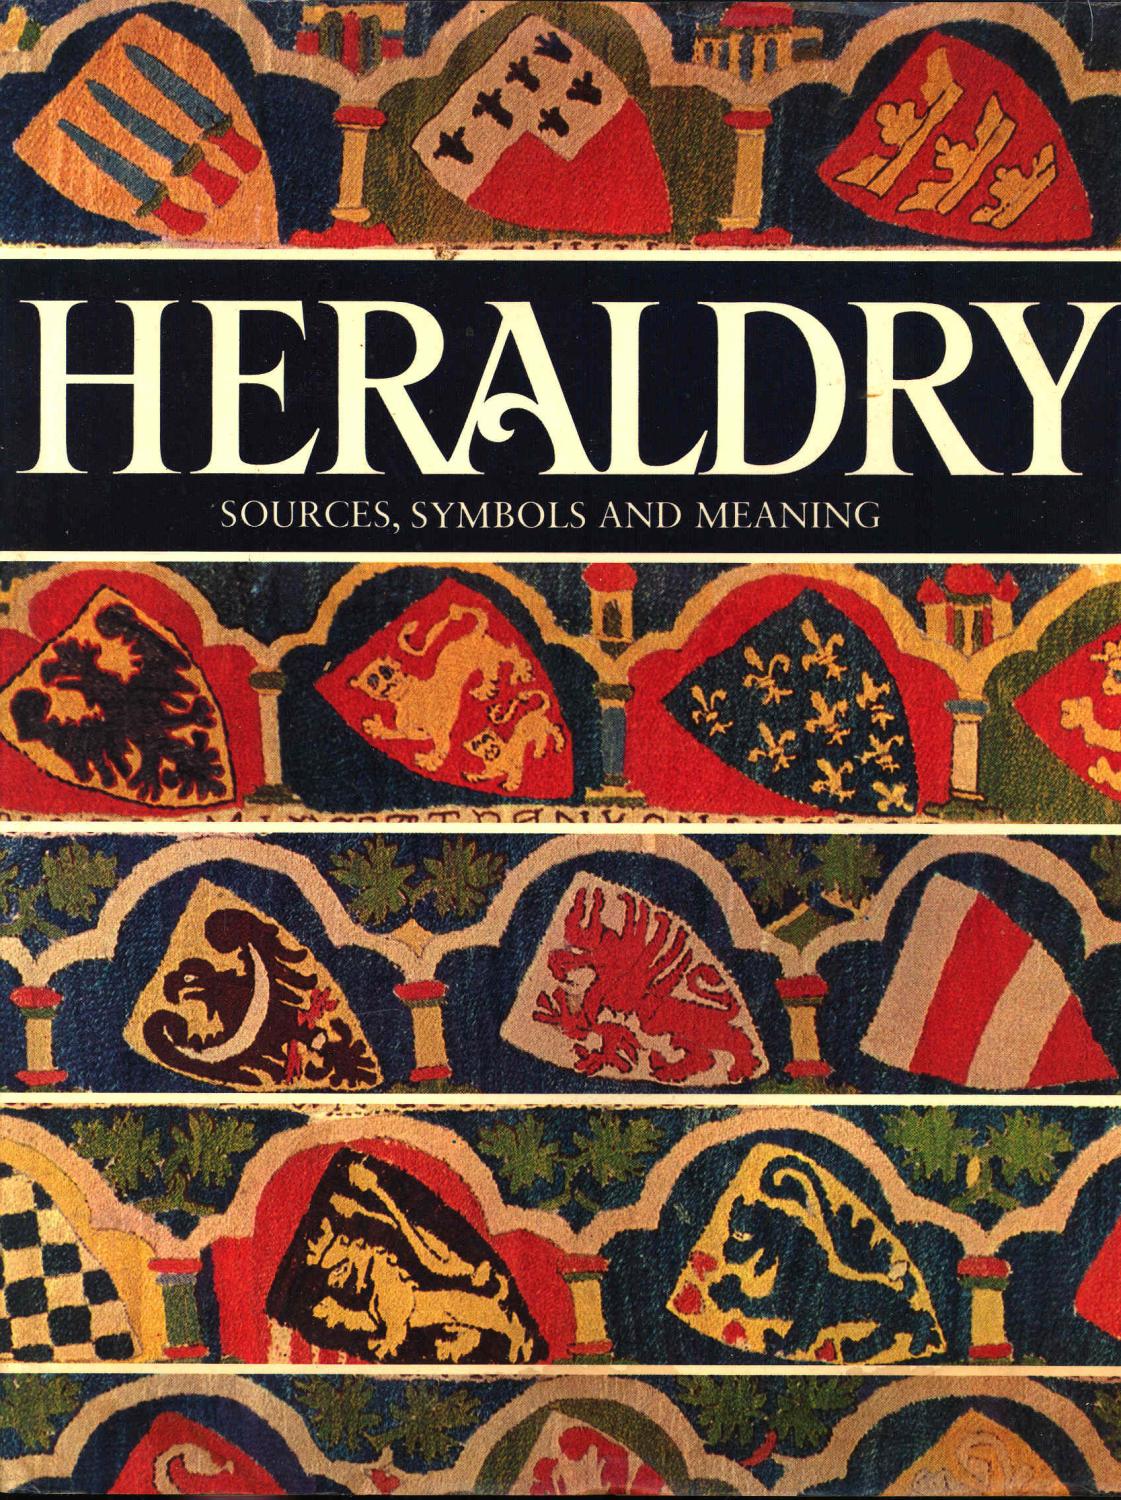 Heraldry. Sources, symbols and meaning. With contributions by: J. P. Brooke-Little. Designed by Robert Tobler.